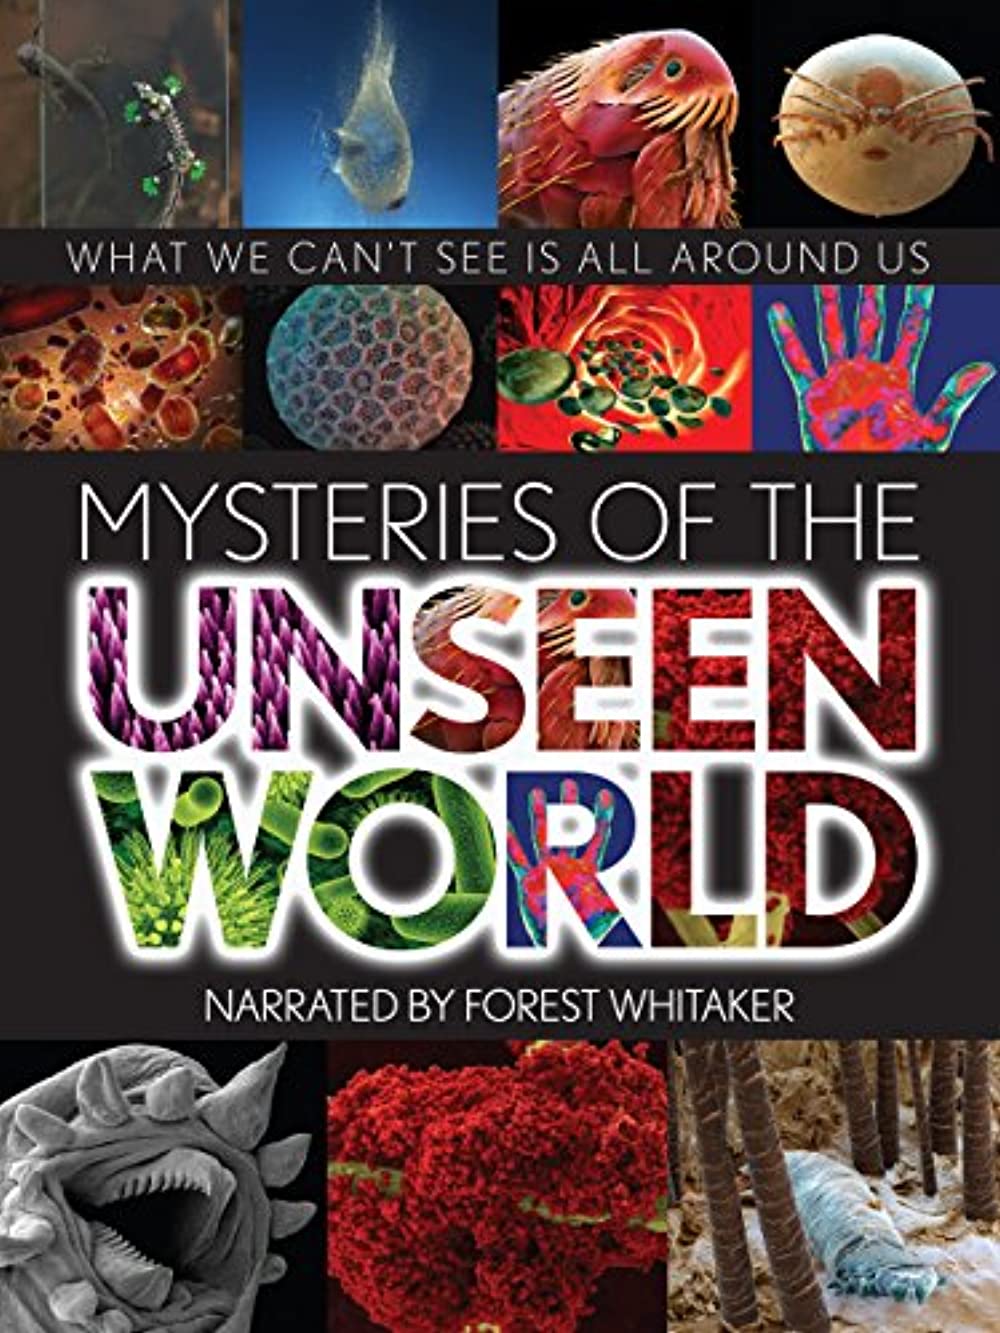 Mysteries of the Unseen World (Short 2013)